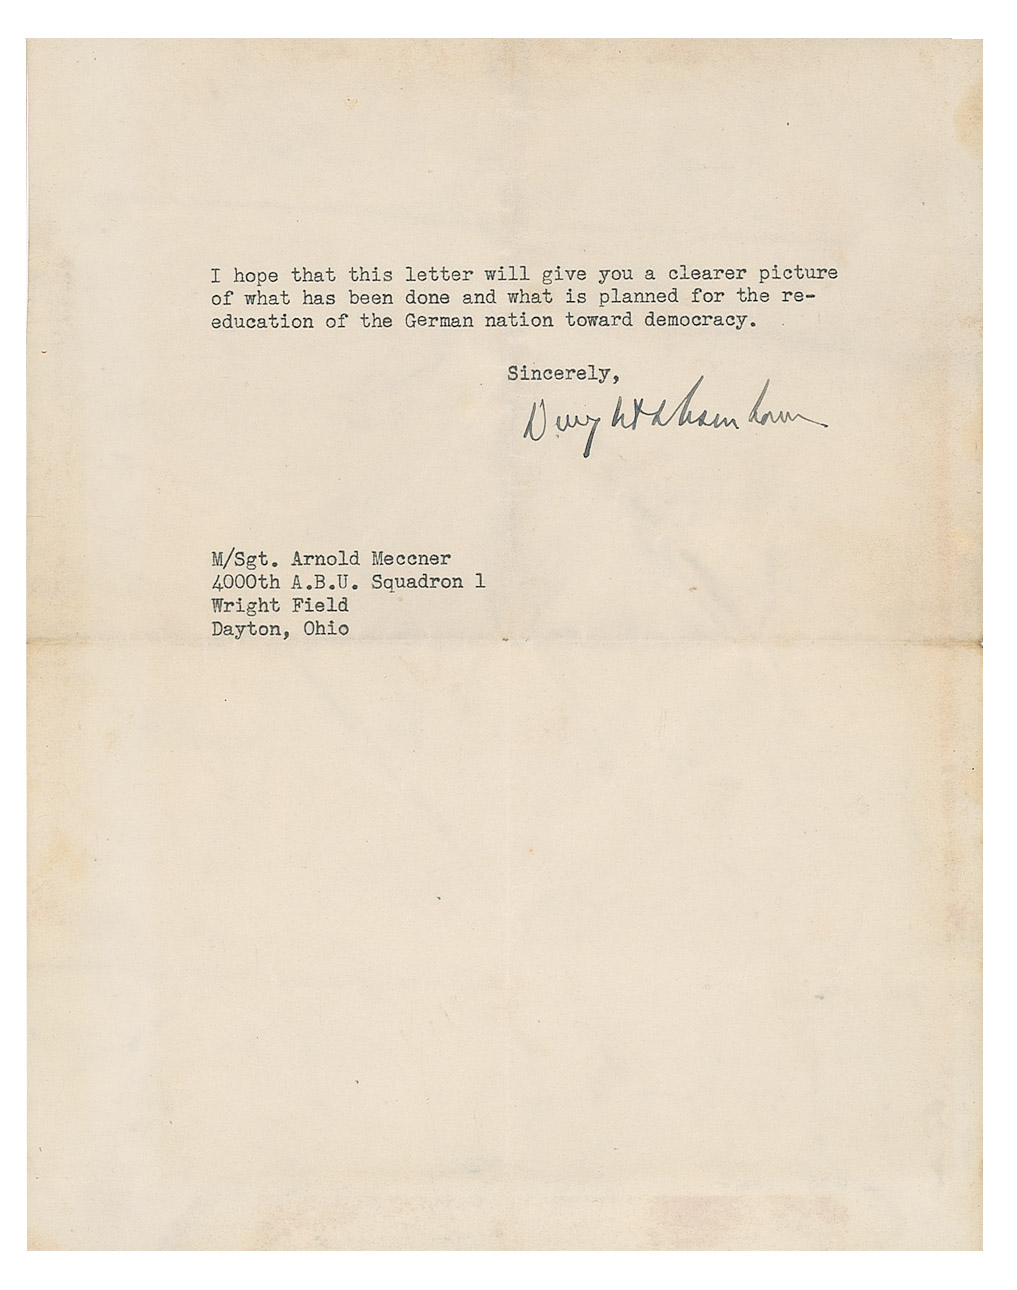 Lot #28 Dwight D. Eisenhower Typed Letter Signed on Re-Educating Postwar Germany: "There is no thought of relinquishing our control until Nazi ideology has been eradicated" - Image 2